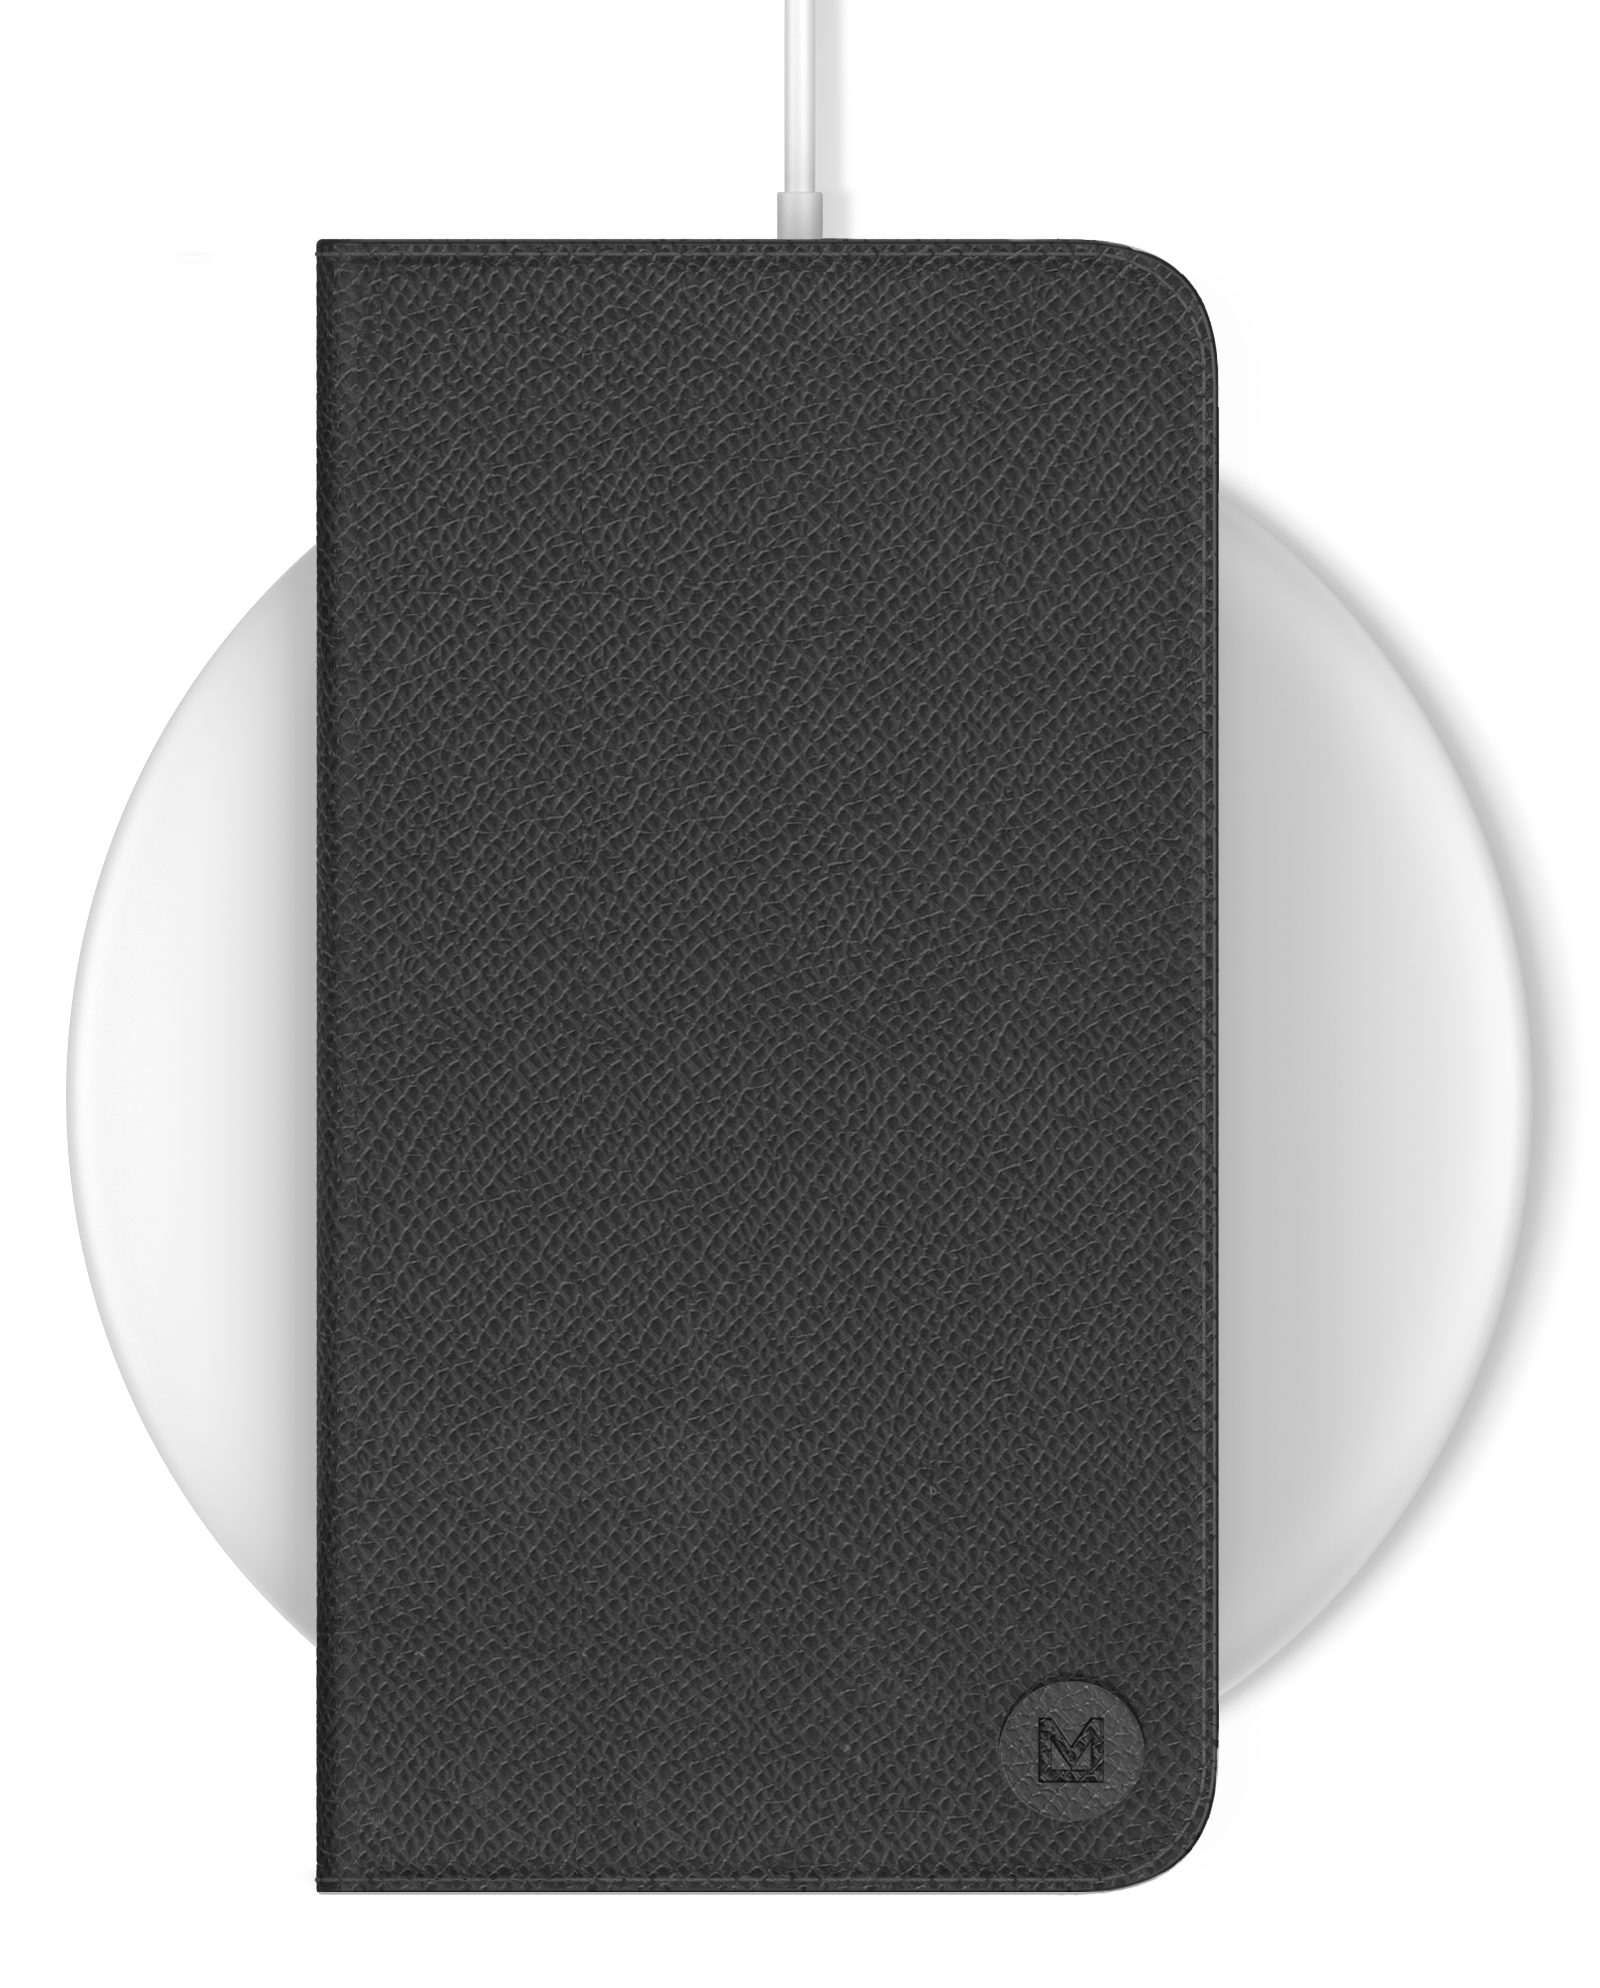 Cell phone wirelessly charging with Mason folio case